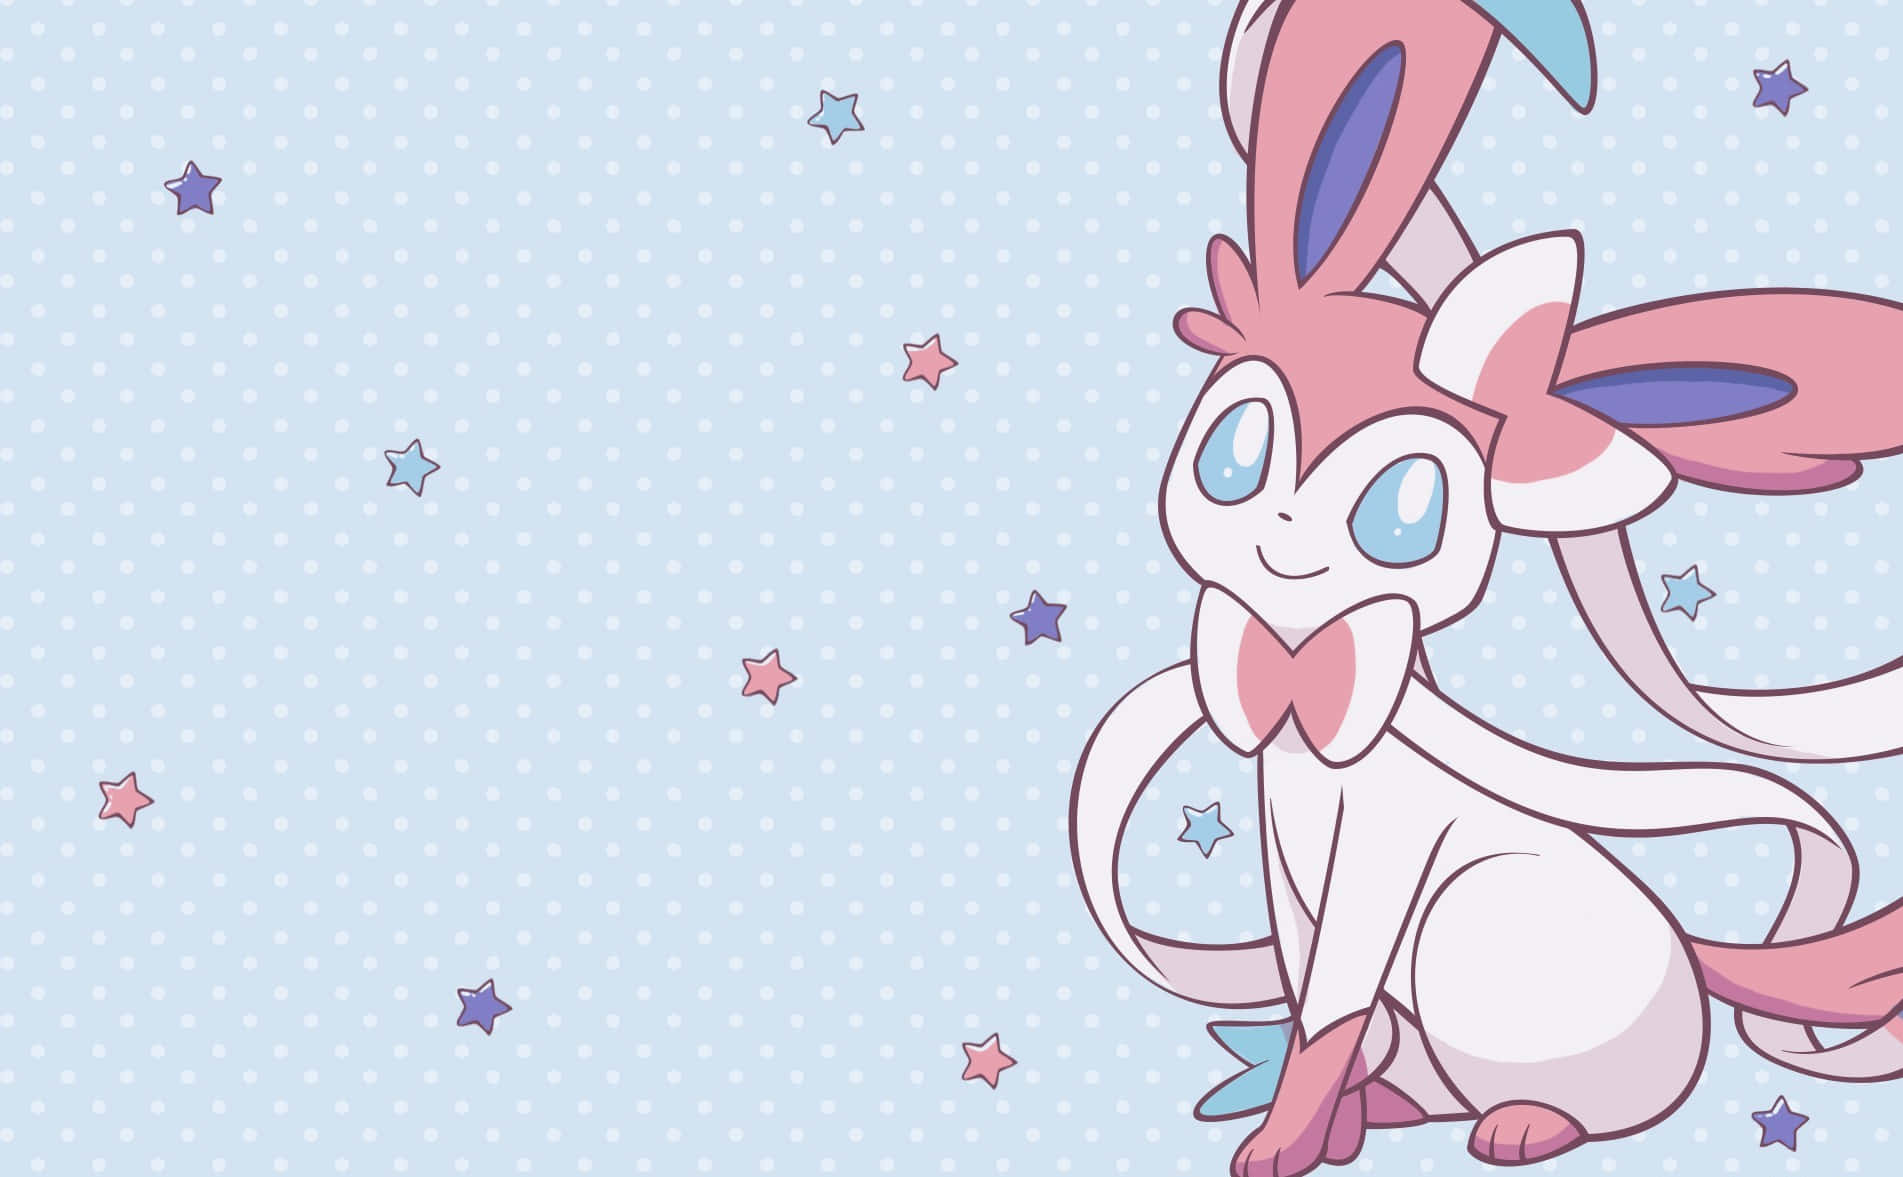 "A Lovely Sylveon Flying Amongst the Clouds" Wallpaper